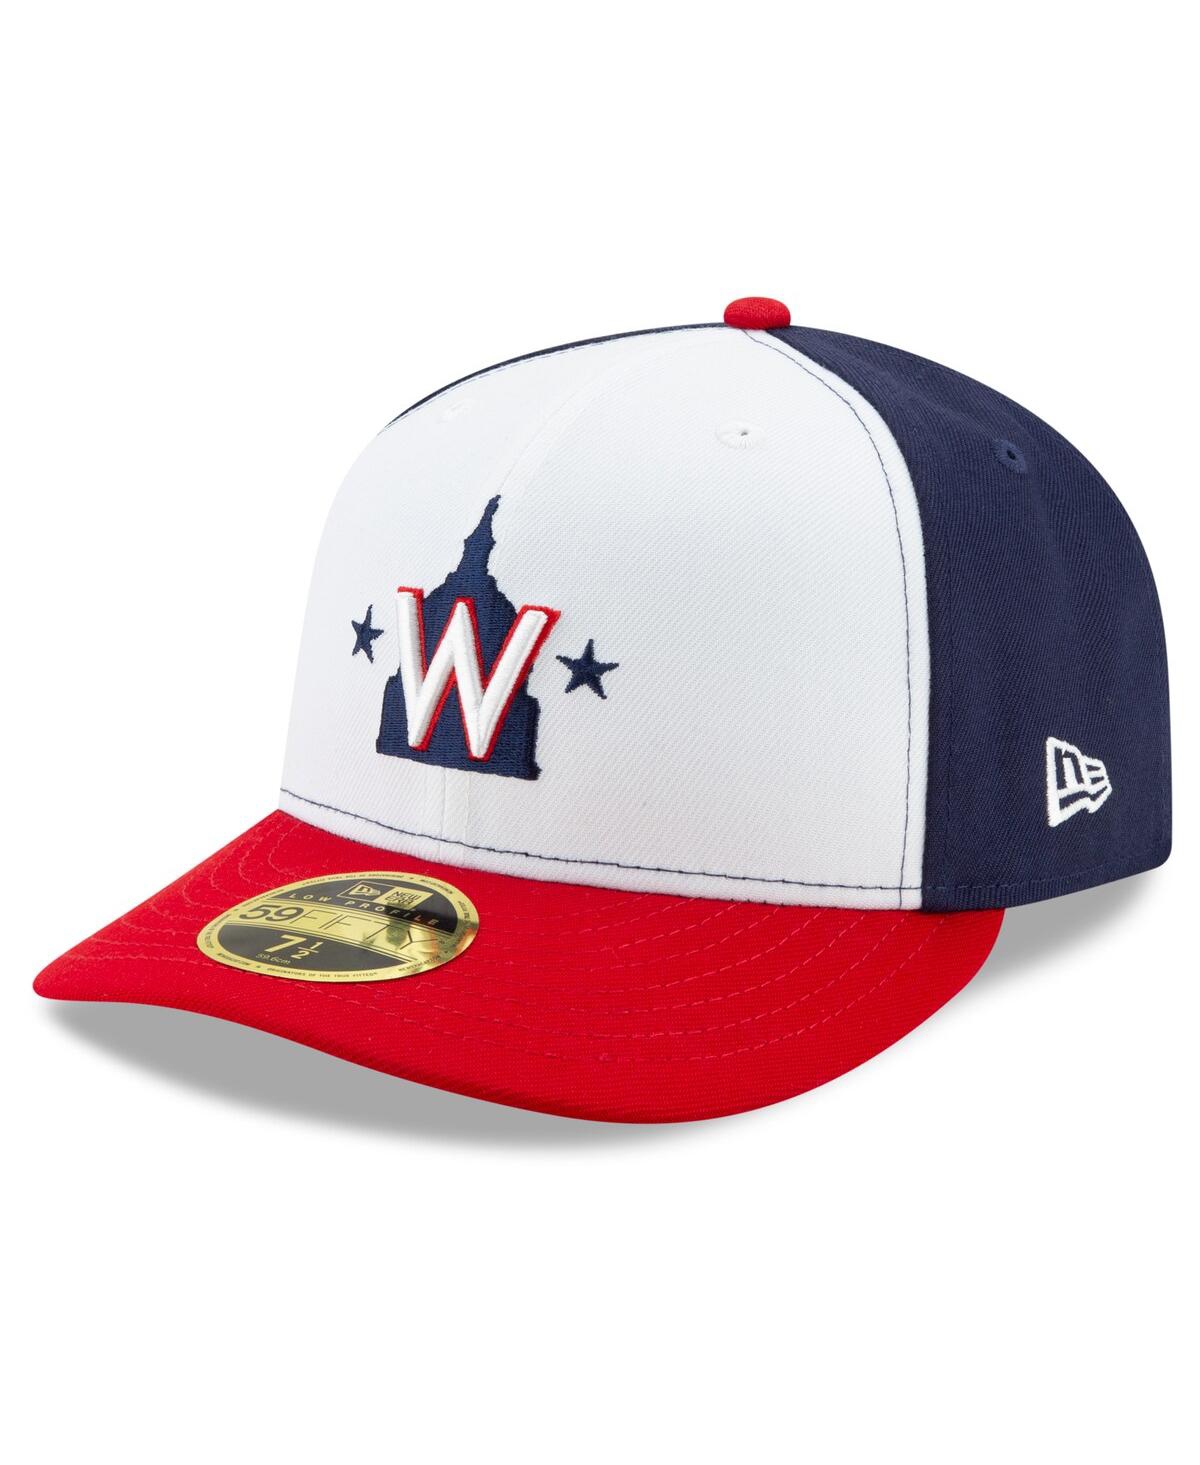 Men's New Era White, Navy Washington Nationals Alternate 2020 Authentic Collection On-Field Low Profile Fitted Hat - White, Navy